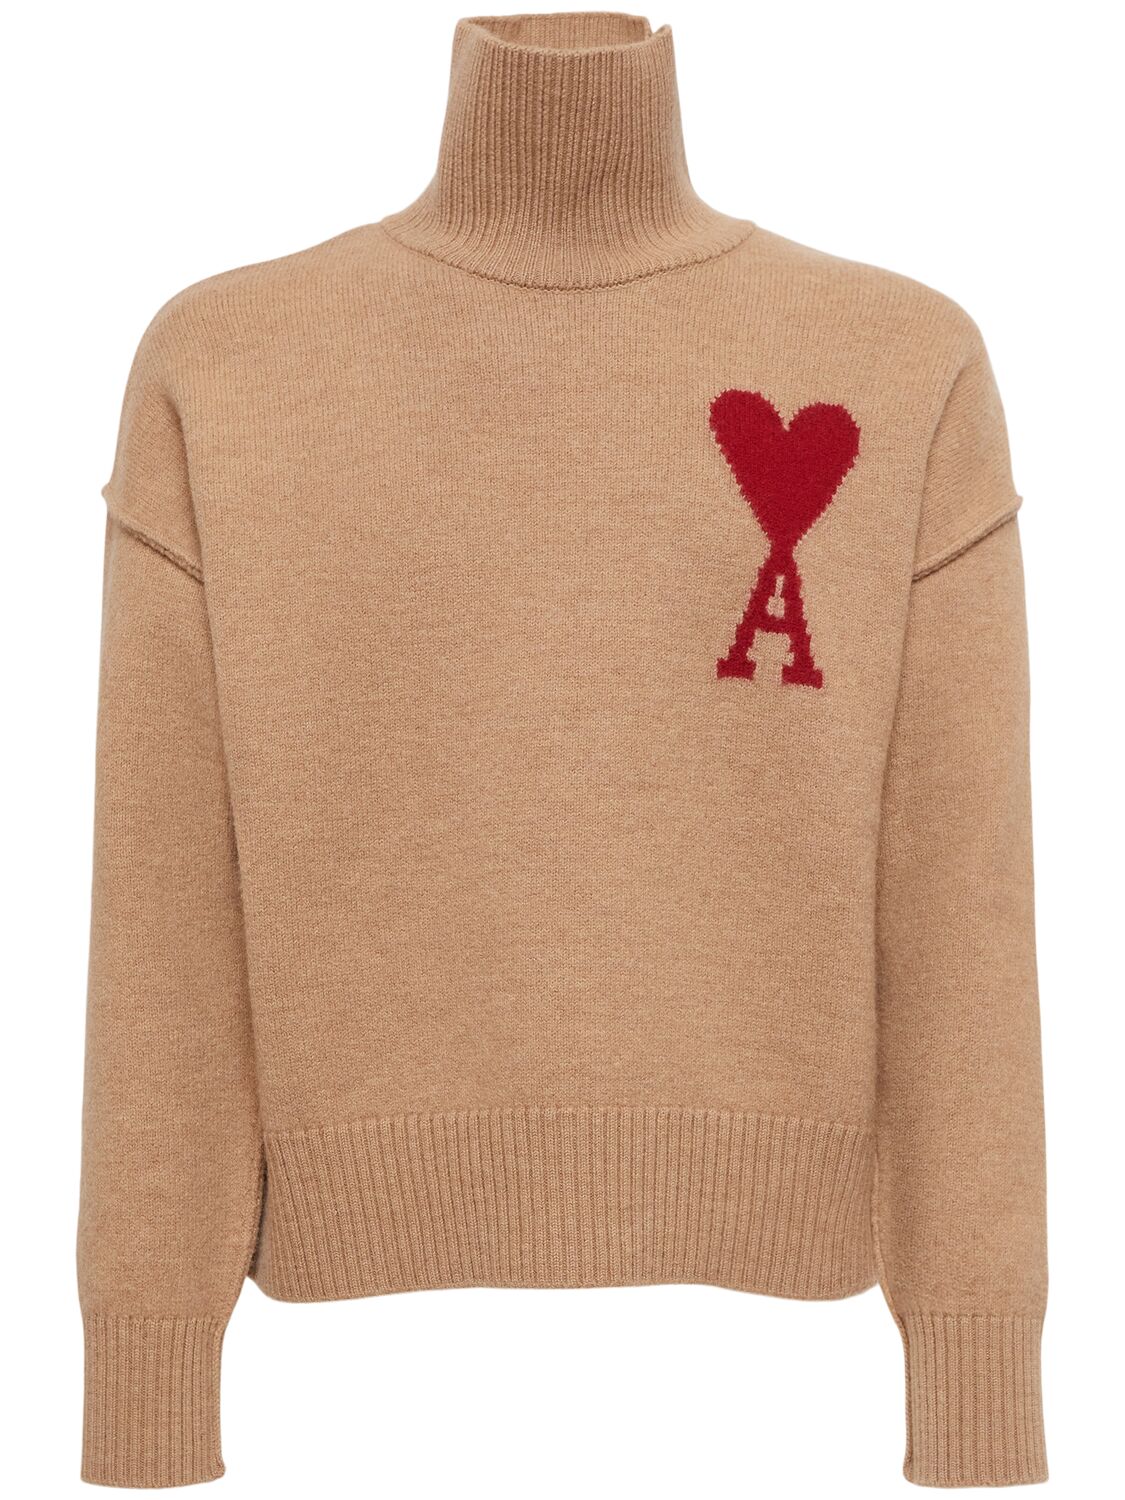 Ami Alexandre Mattiussi Adc Wool Sweater In Camel/red